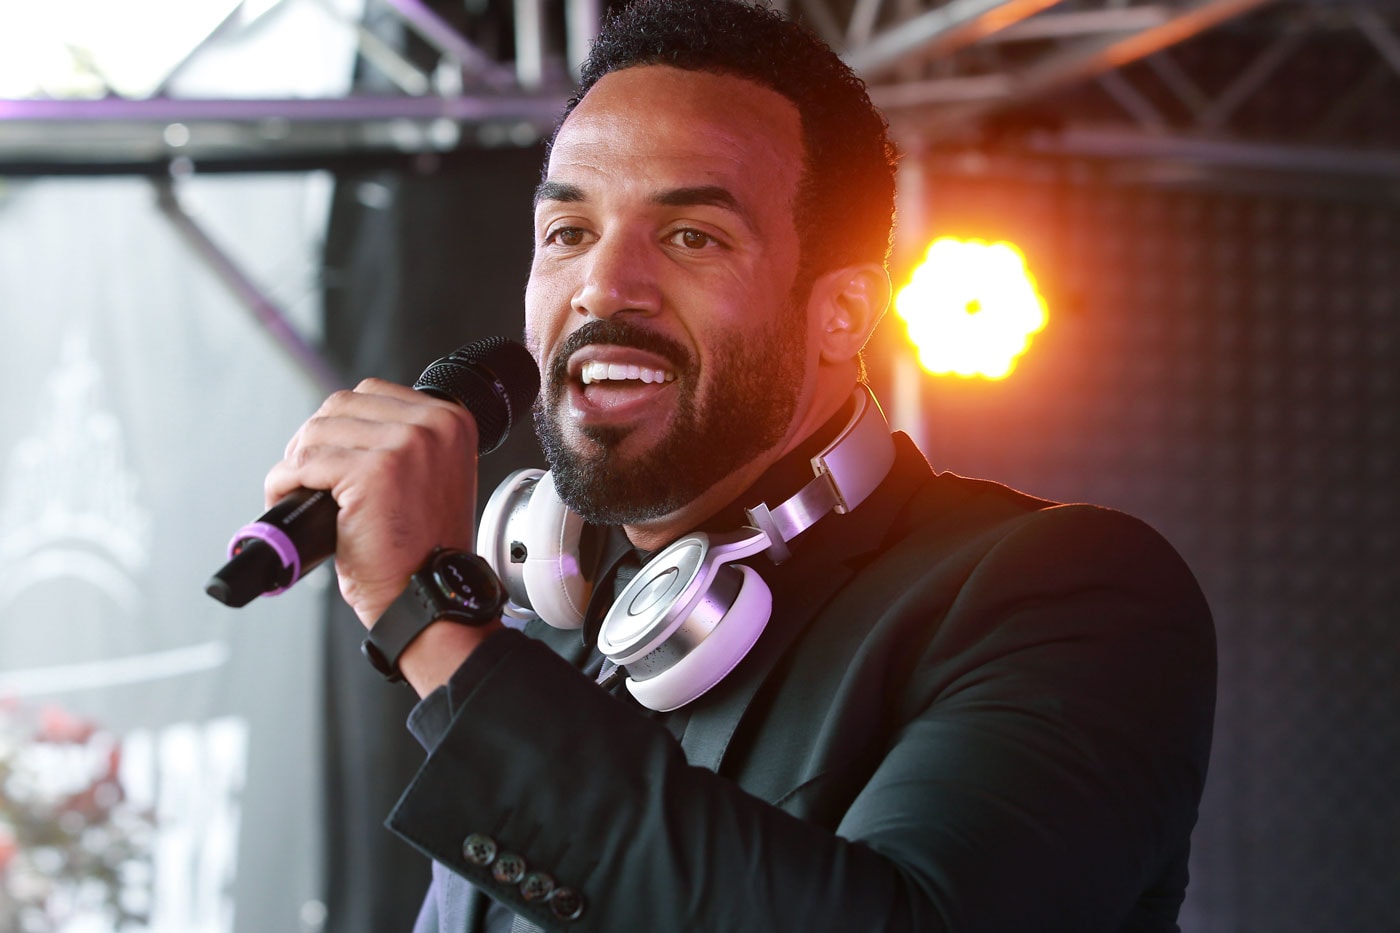 Craig David Goes In, Watch Him Sing "Fill Me In" Over Jack Ü's "Where Are Ü Now"